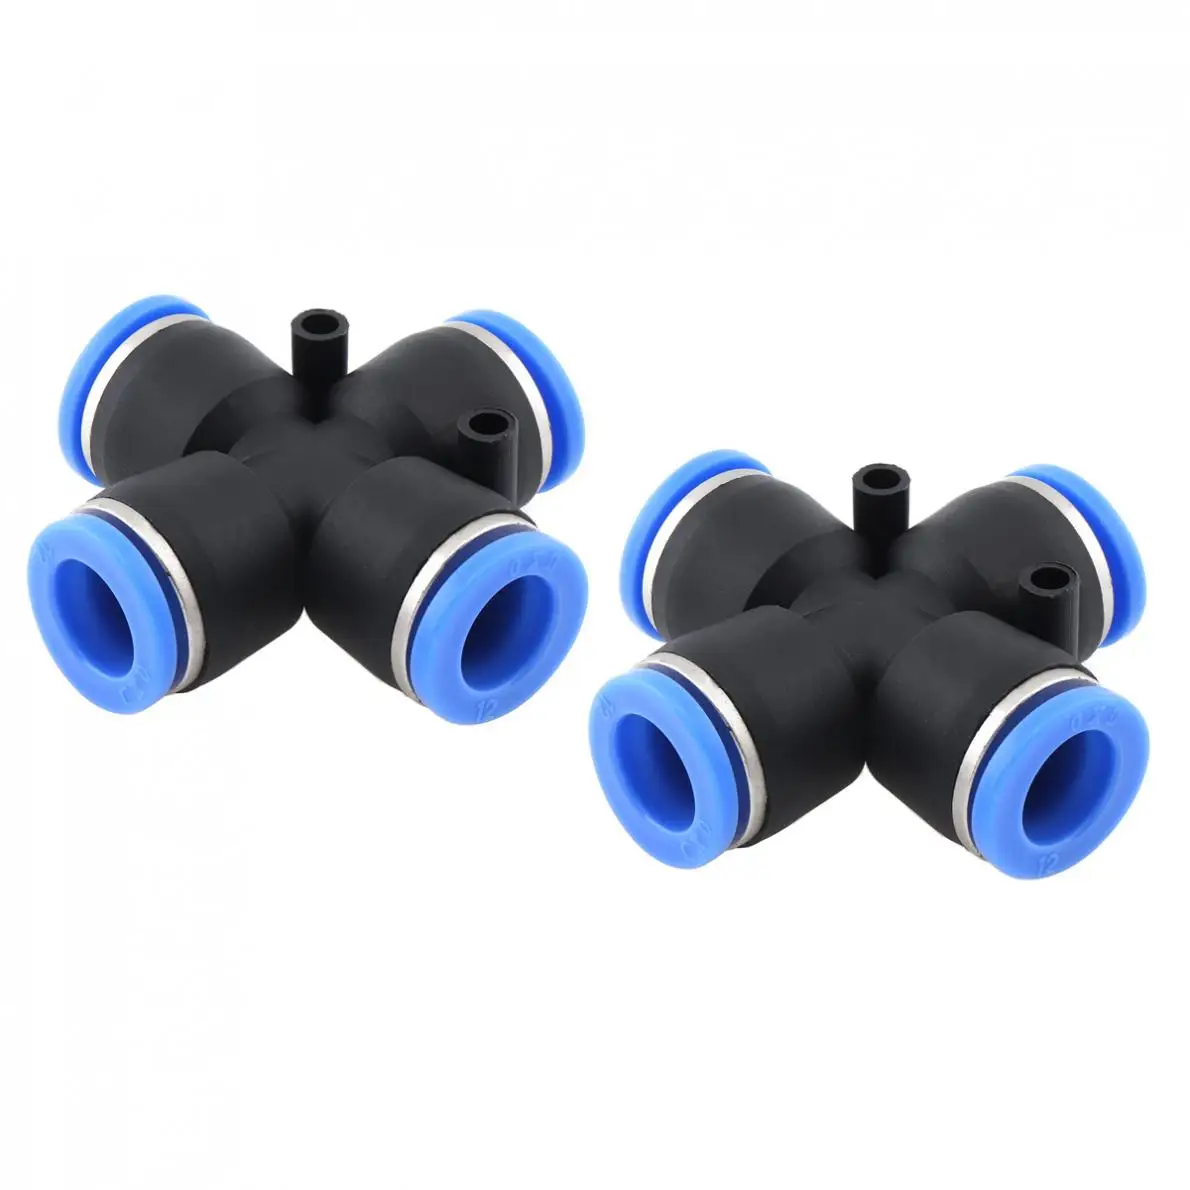 

2pcs/lot 12mm Cross Type APE Plastic Four-way Pneumatic Quick Connector Pneumatic Insertion Air Tube for Air Tool Quick Fitting